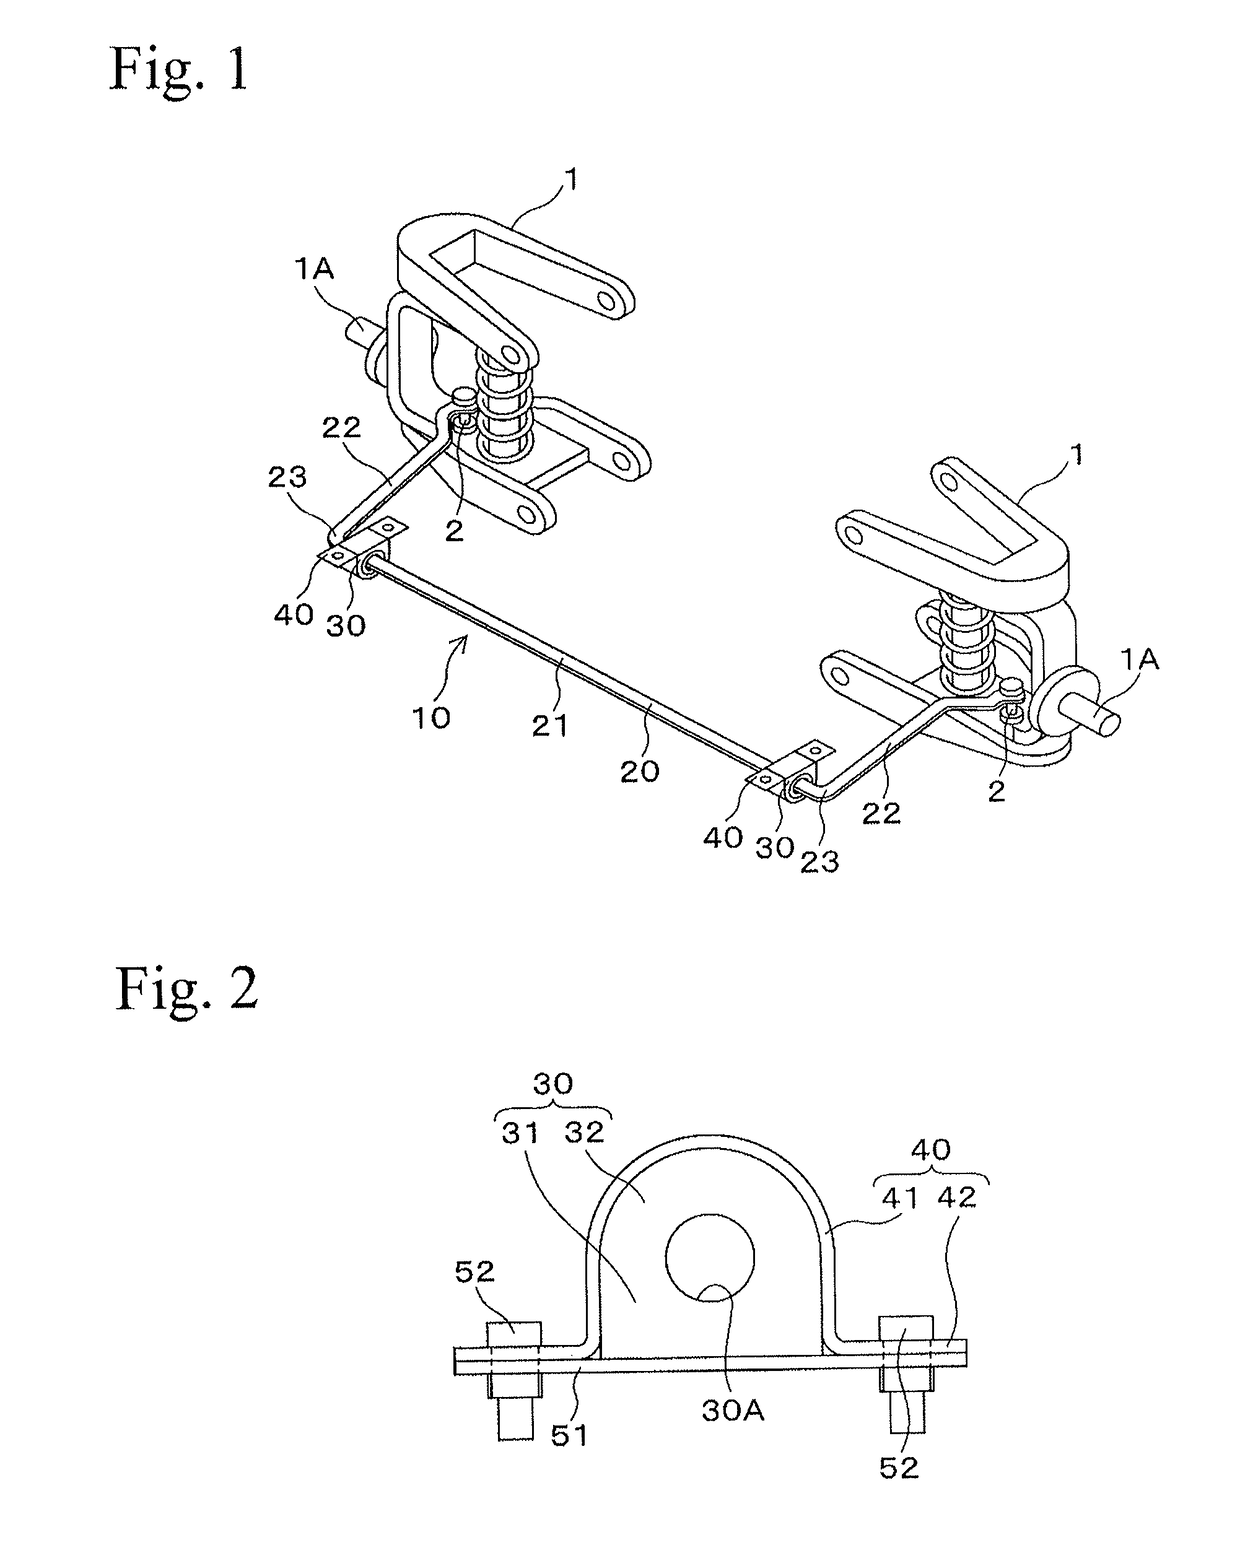 Bush for stabilizer, fastening tool, and fastening method